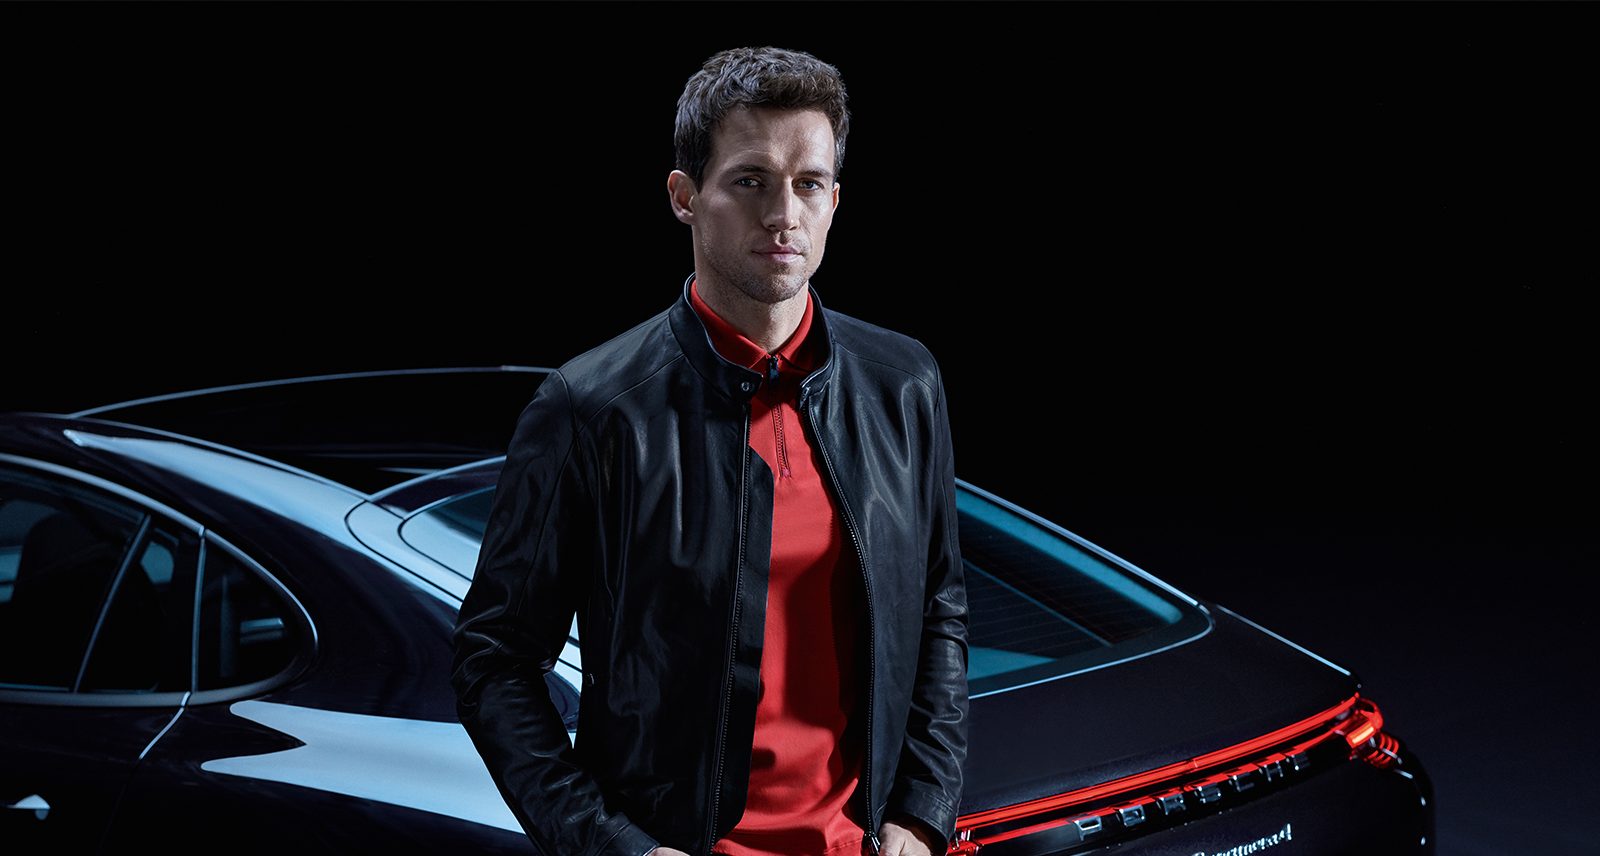 HUGO BOSS Is About to Make Porsche the Most Stylish Team in Formula E Racing